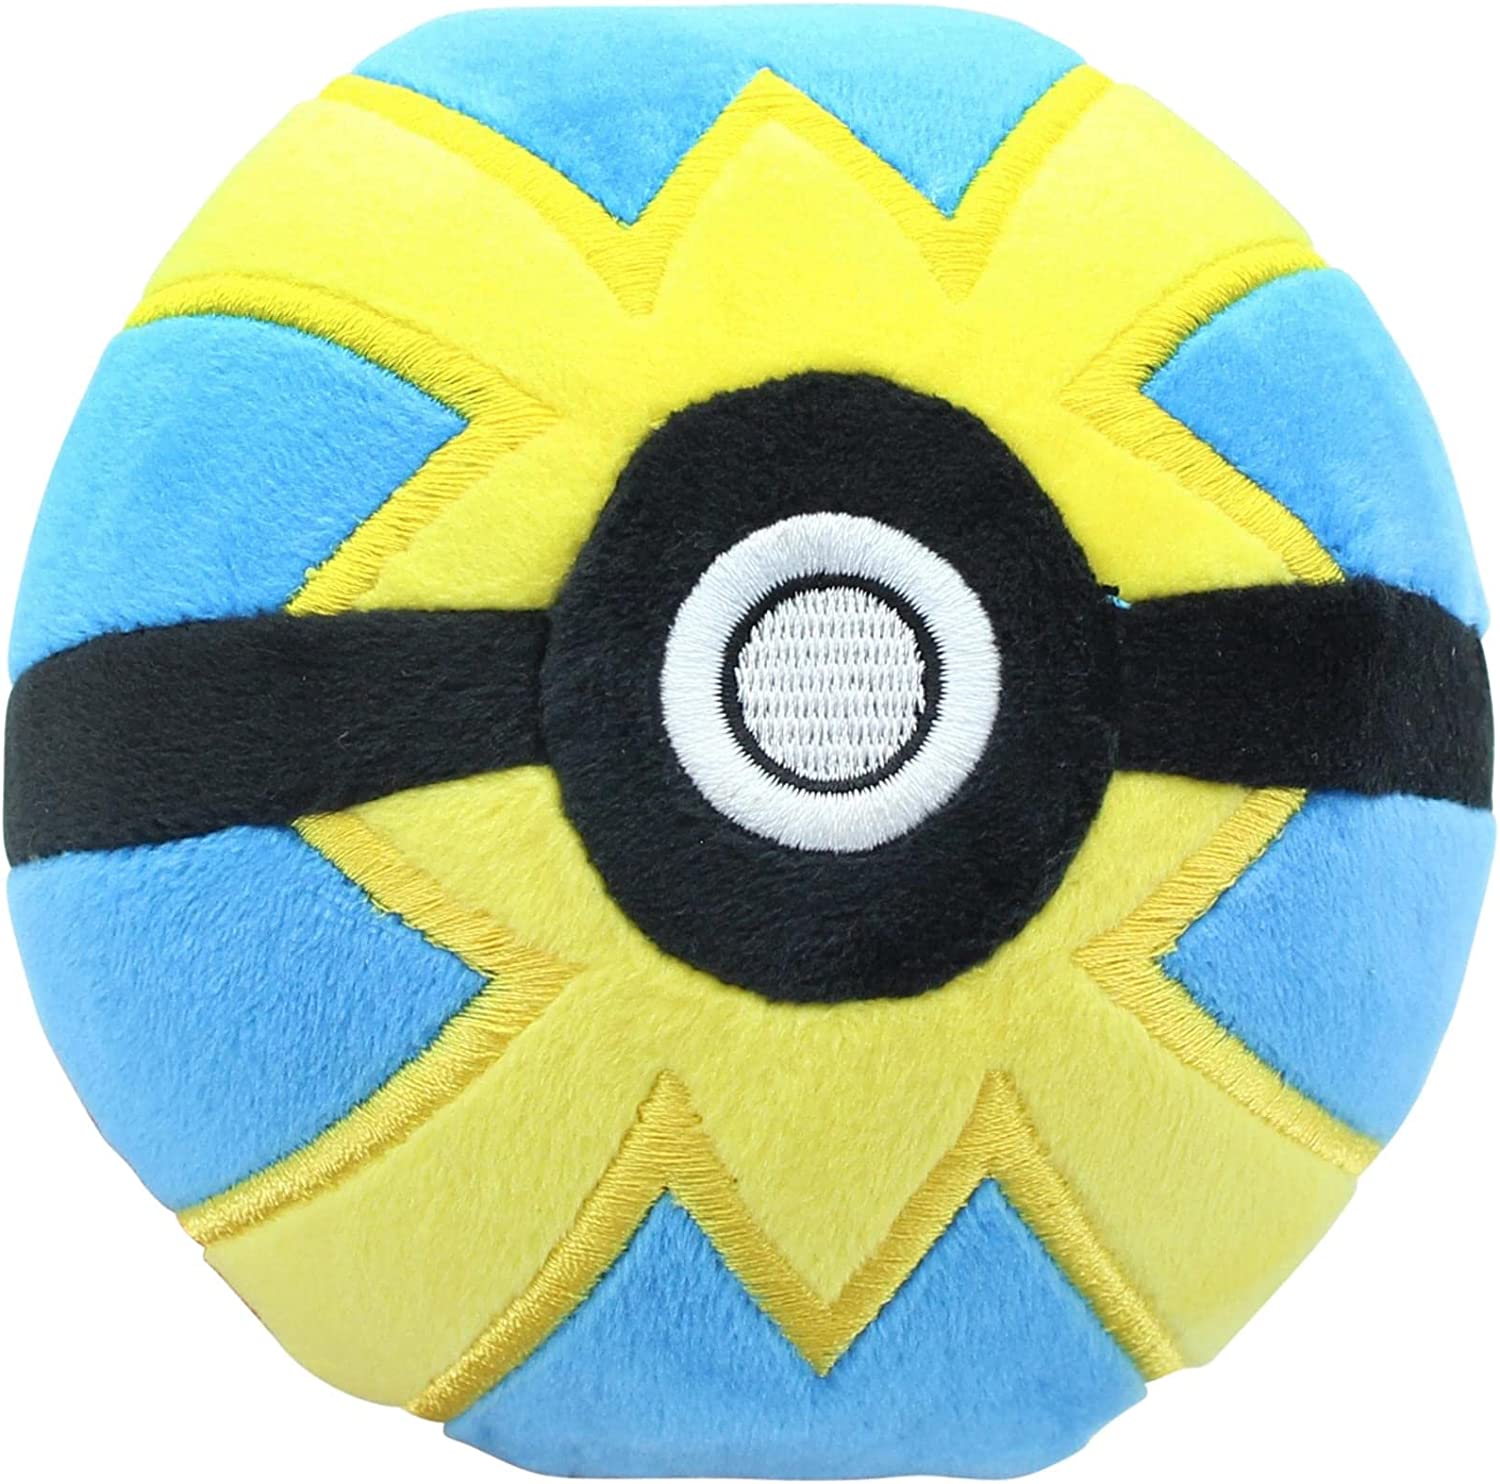 WCT Pokemon 5" Plush Pokeball Quick Ball with Weighted Bottom